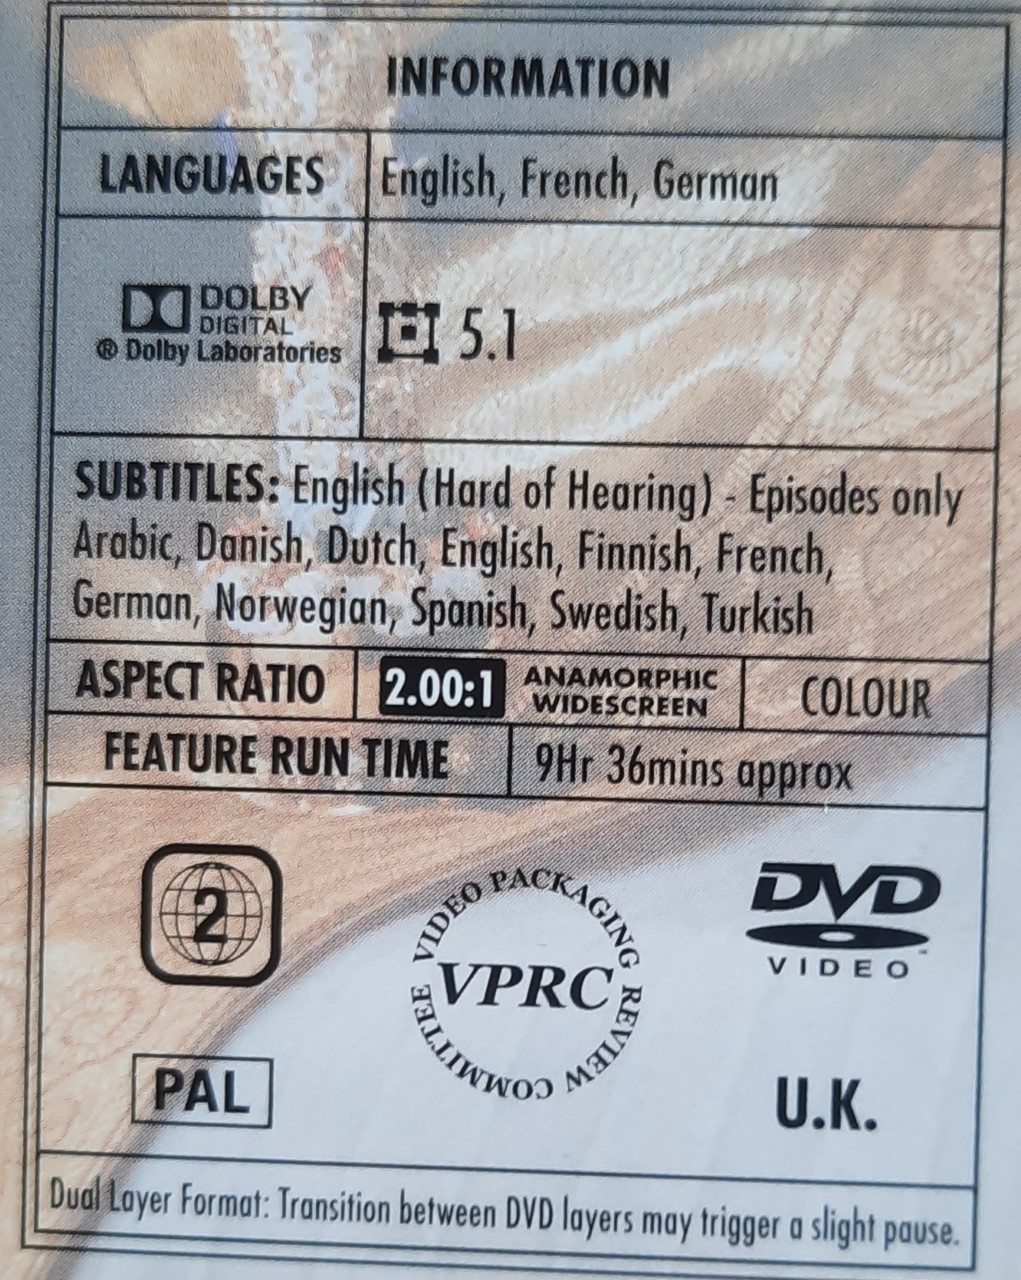 The back of a DVD which contains the information about different languages for audio and subtitles